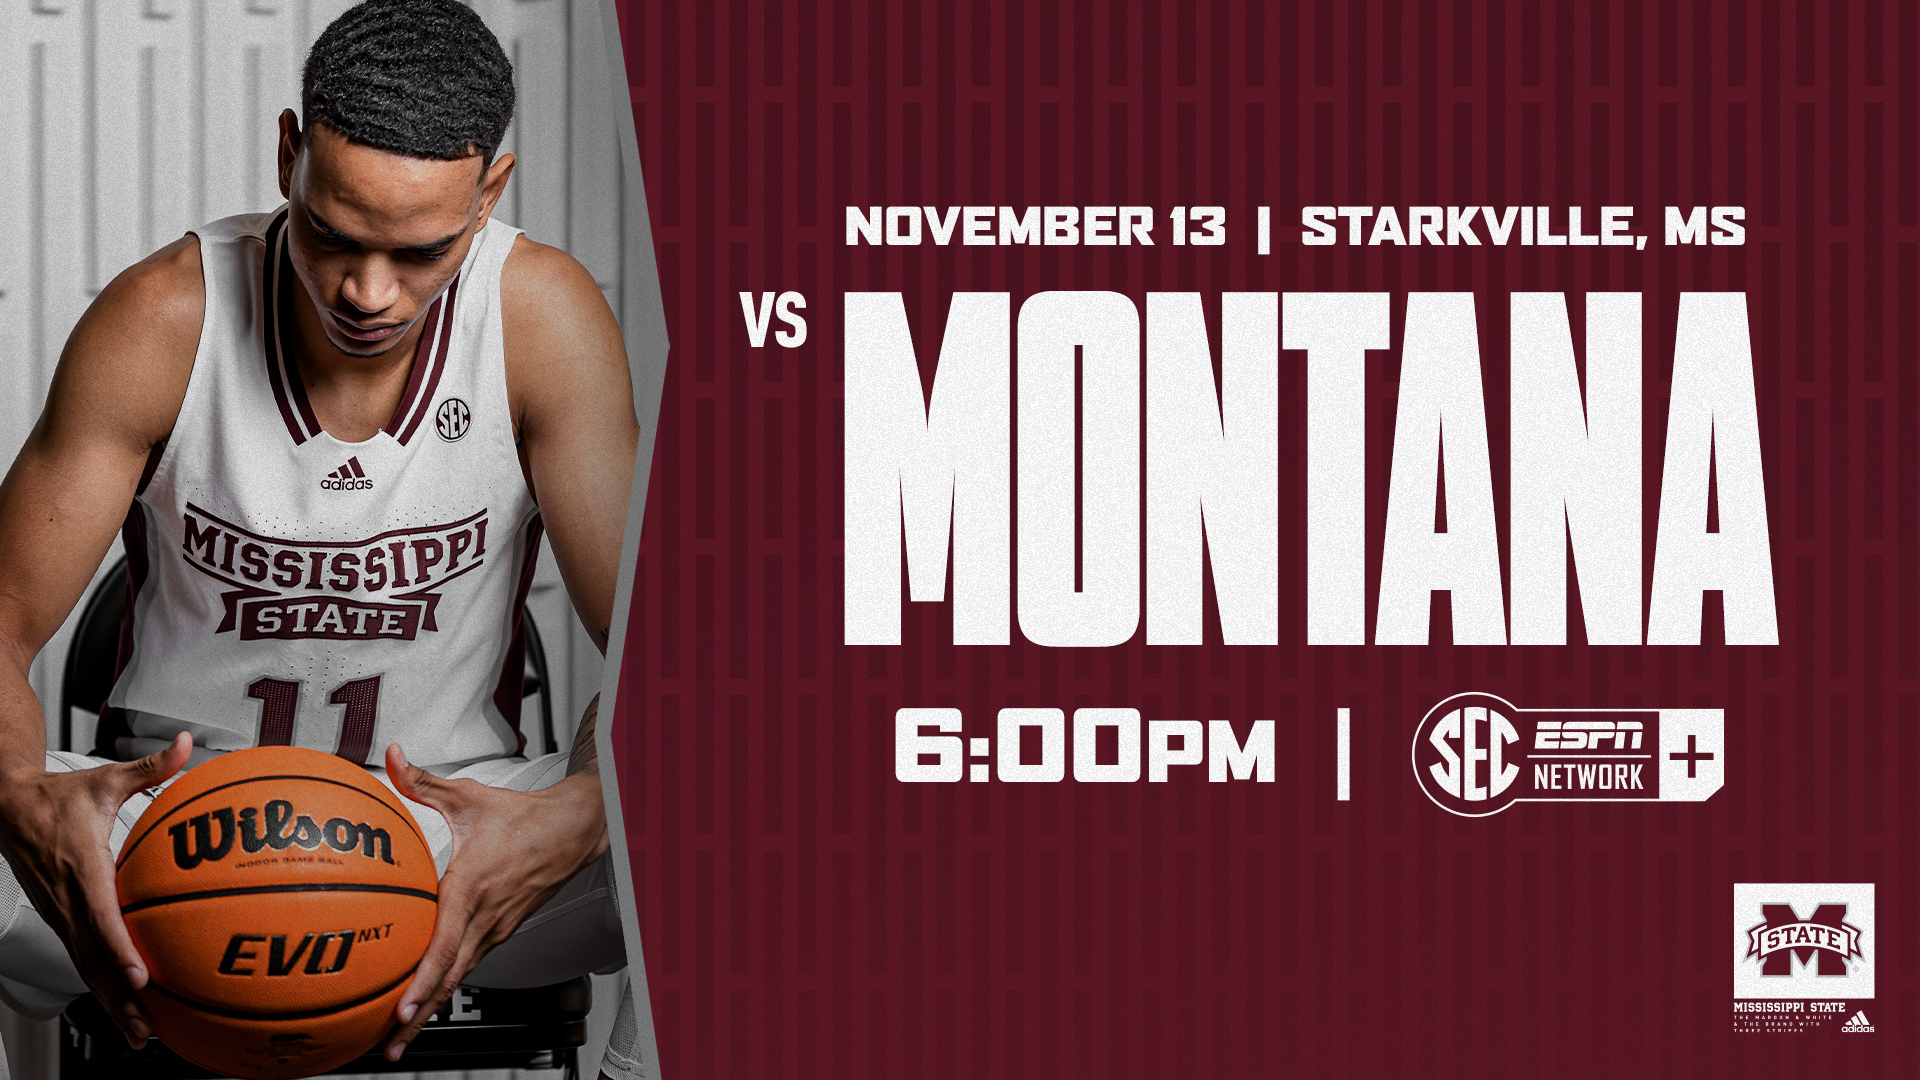 Maroon and white graphic with image of MSU men's basketball player Andersson Garcia seated and staring down at an orange Wilson basketball.